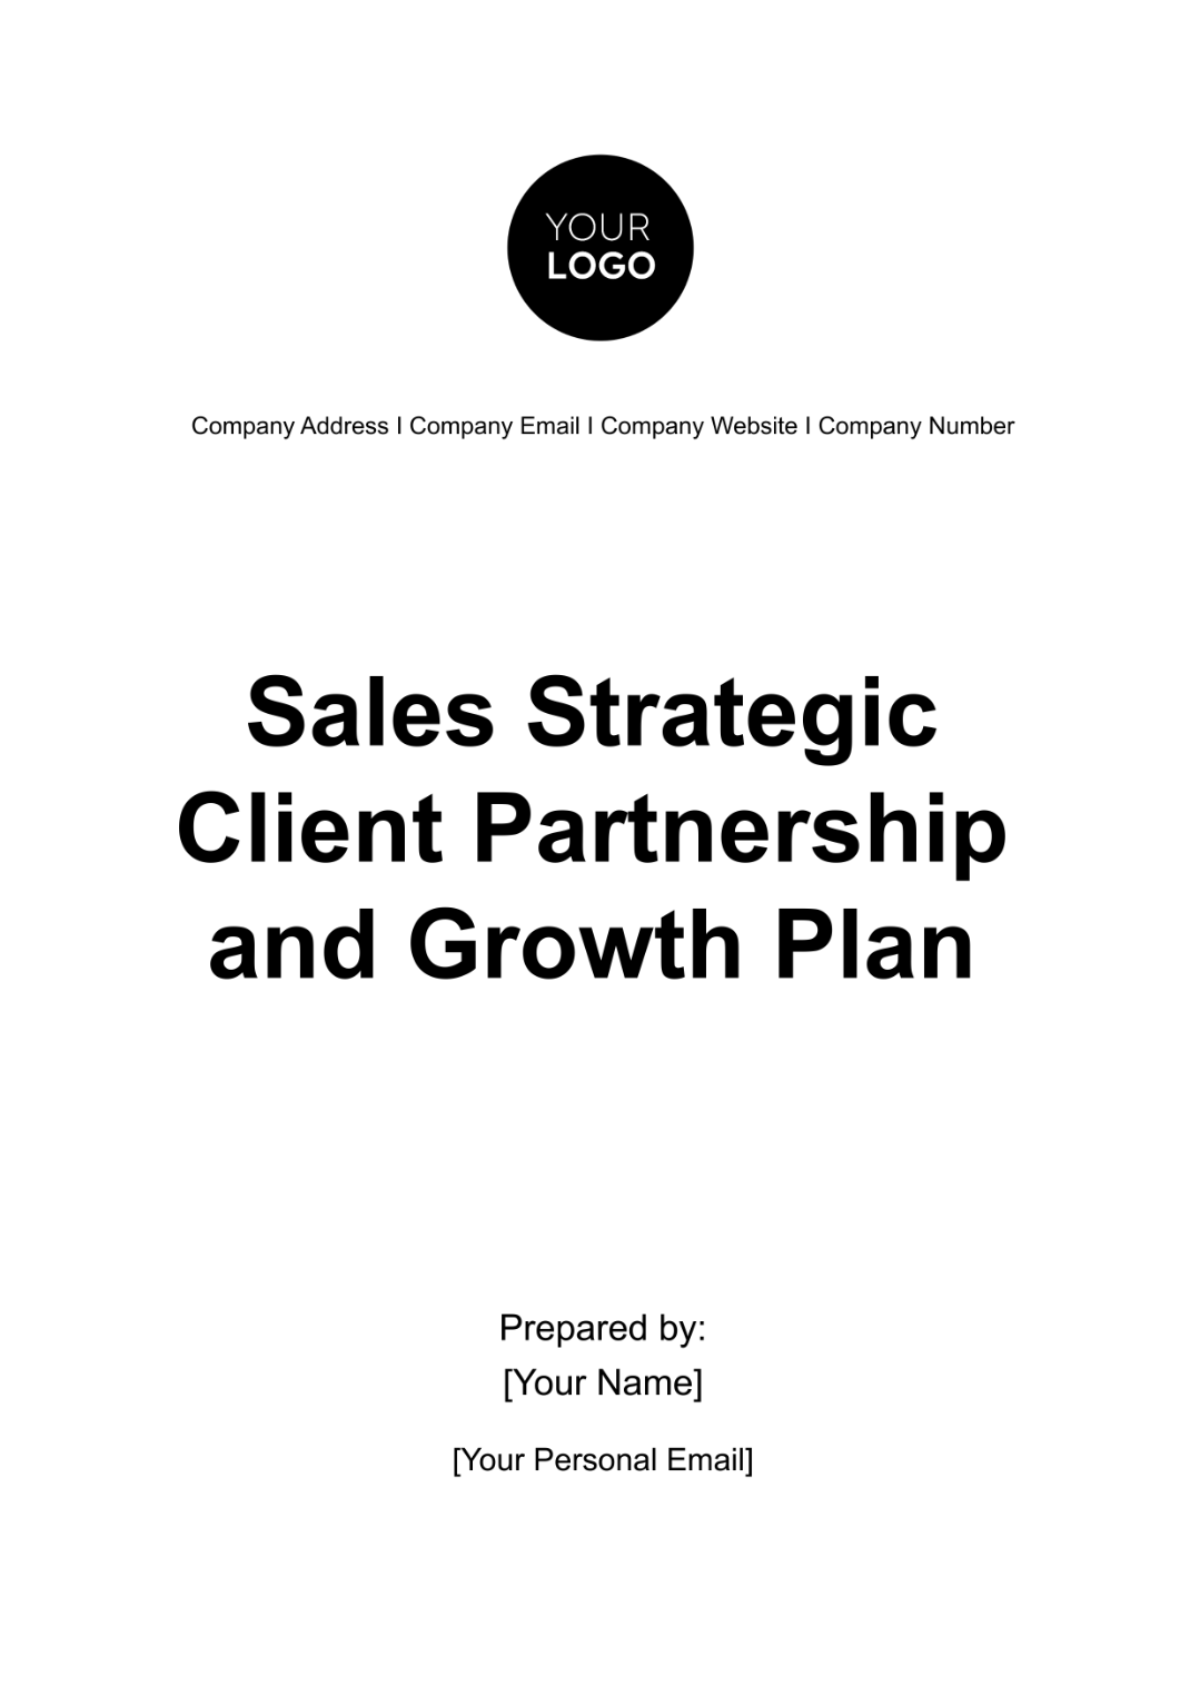 Free Sales Strategic Client Partnership and Growth Plan Template